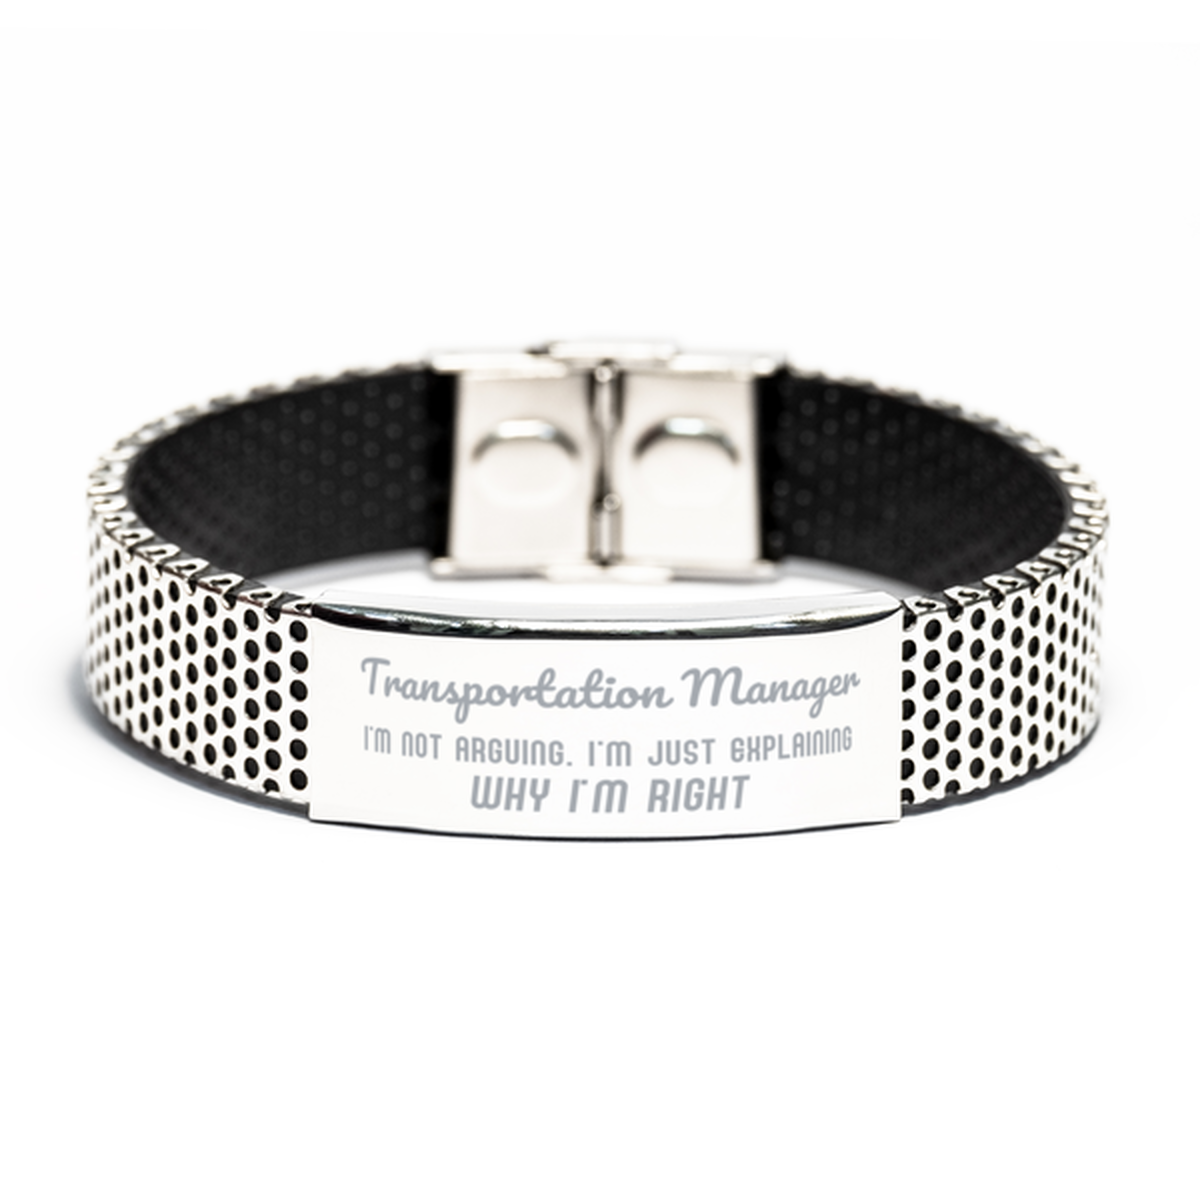 Transportation Manager I'm not Arguing. I'm Just Explaining Why I'm RIGHT Stainless Steel Bracelet, Funny Saying Quote Transportation Manager Gifts For Transportation Manager Graduation Birthday Christmas Gifts for Men Women Coworker